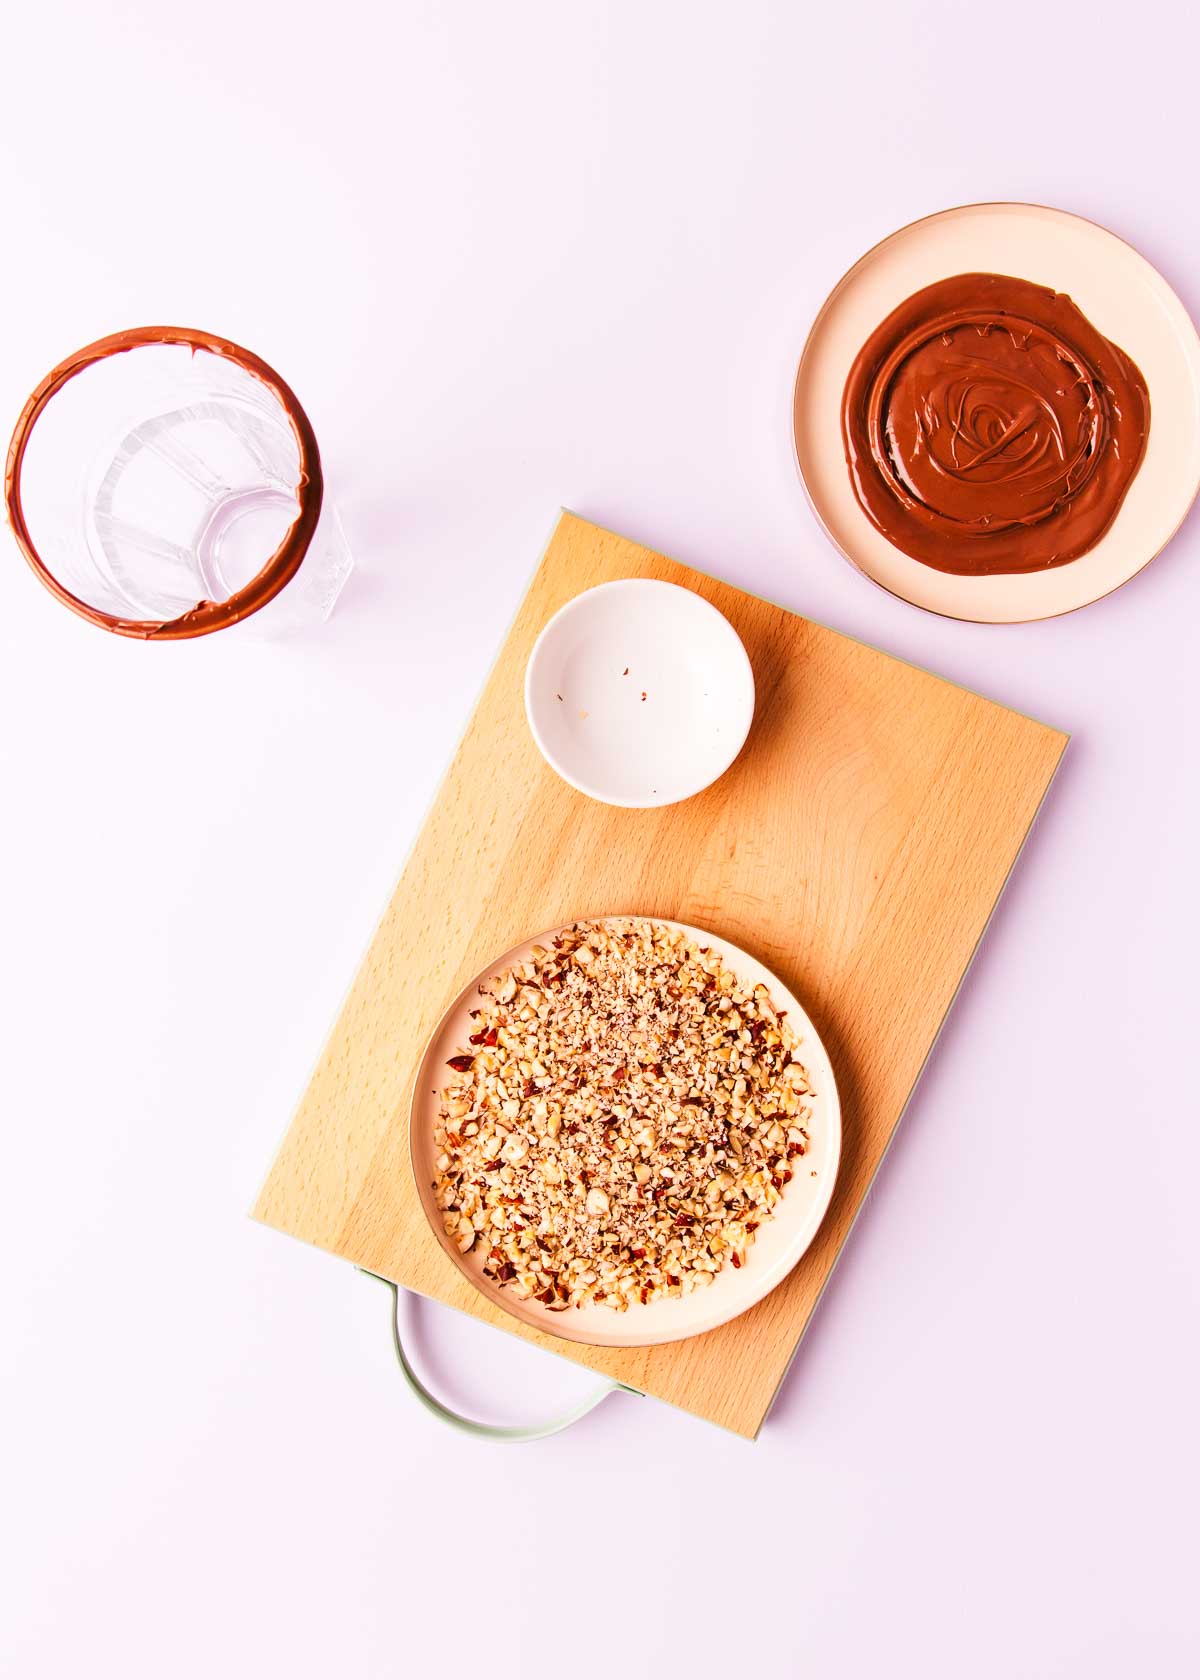 Chopped hazelnuts spread in a thin layer on a pink plate, with a Nutella-dipped glass, on a pale purple background.